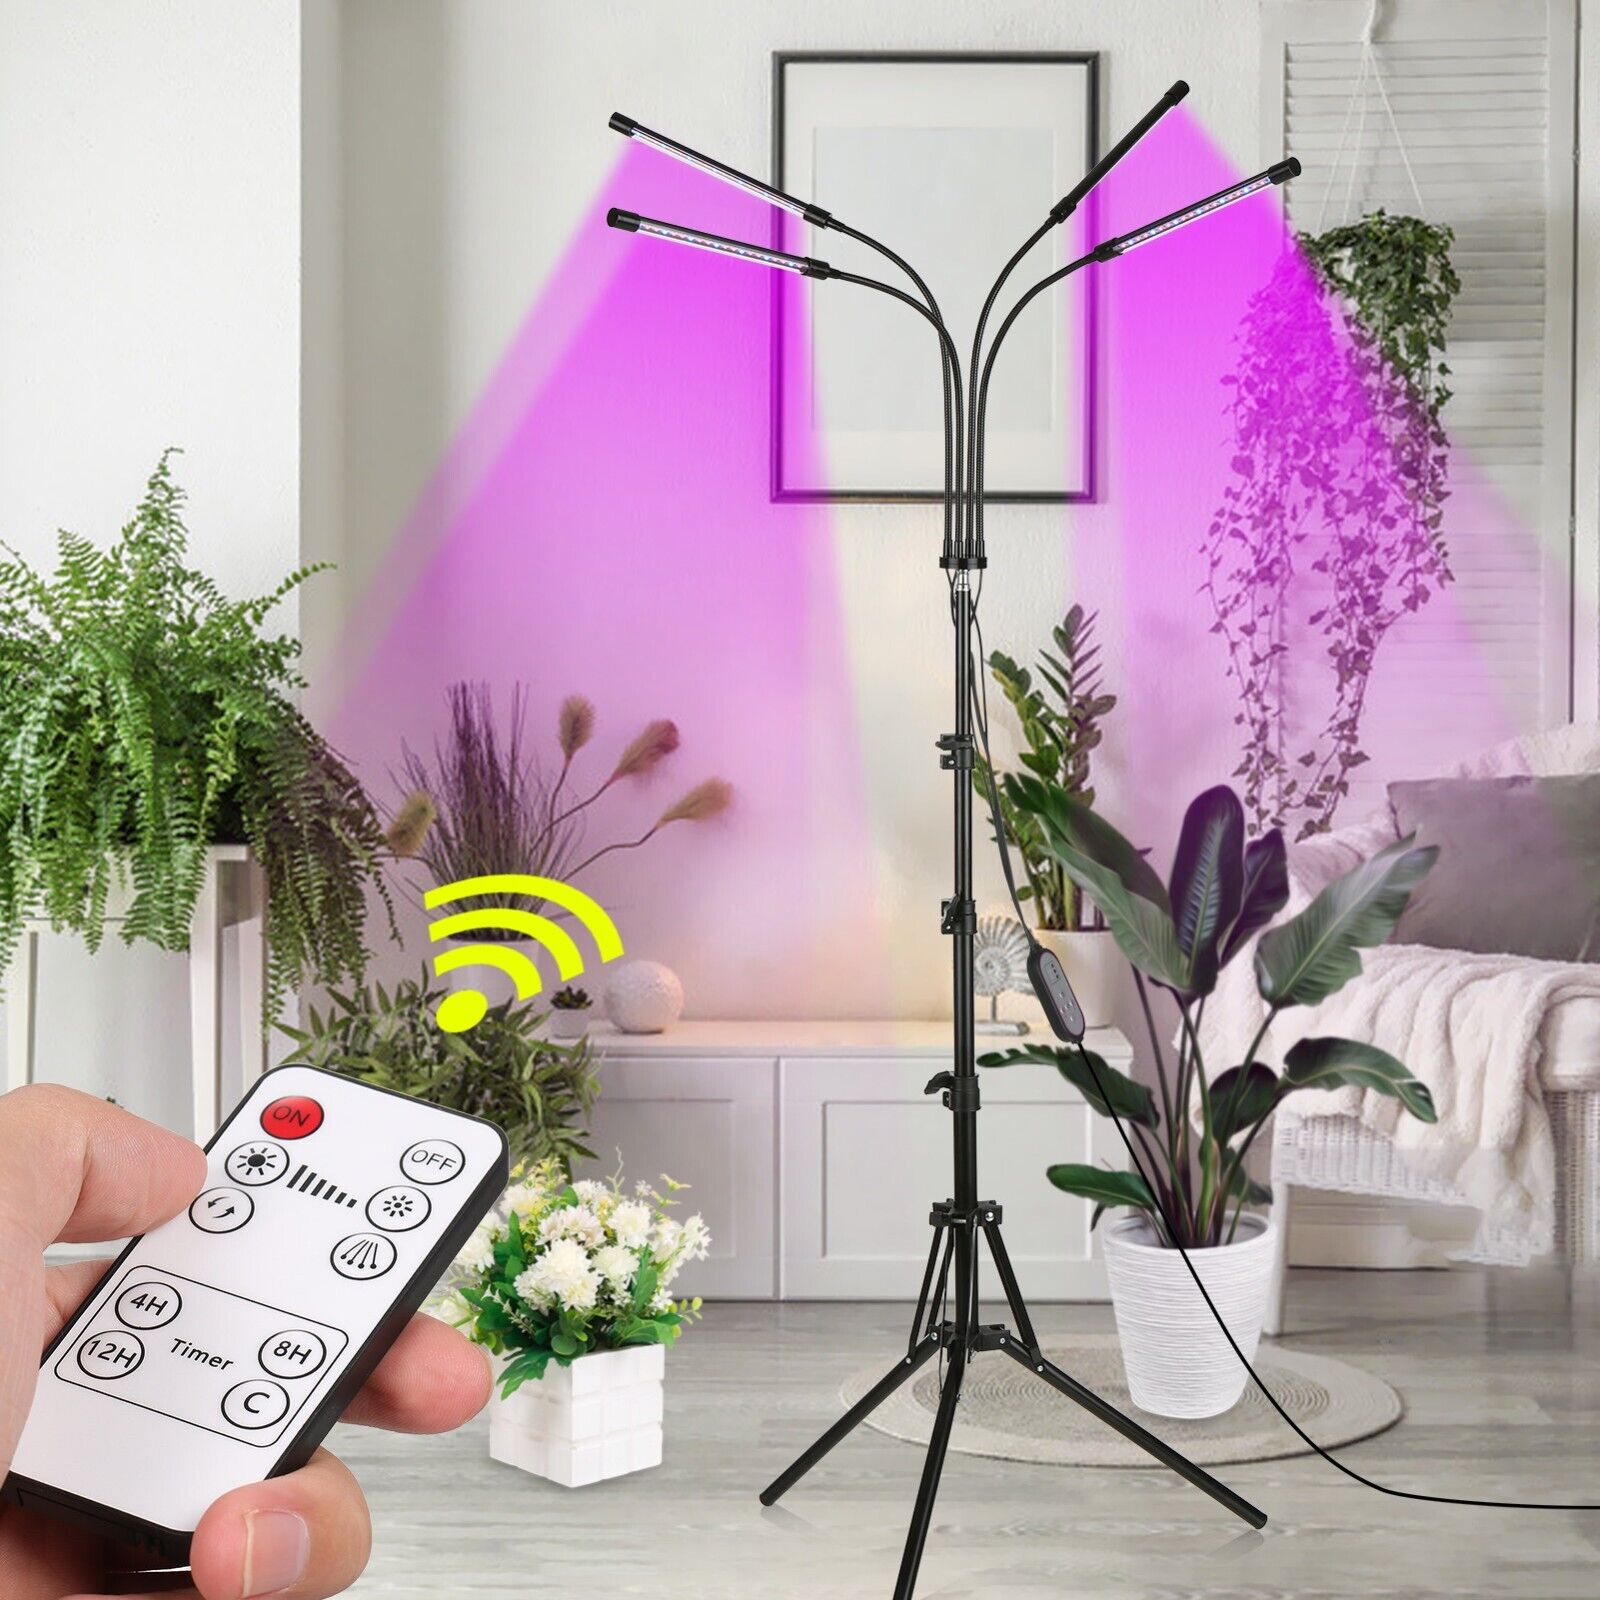 Full Spectrum Plant Grow Lamp Lights for Indoor Plants w/Adjustable Tripod Stand